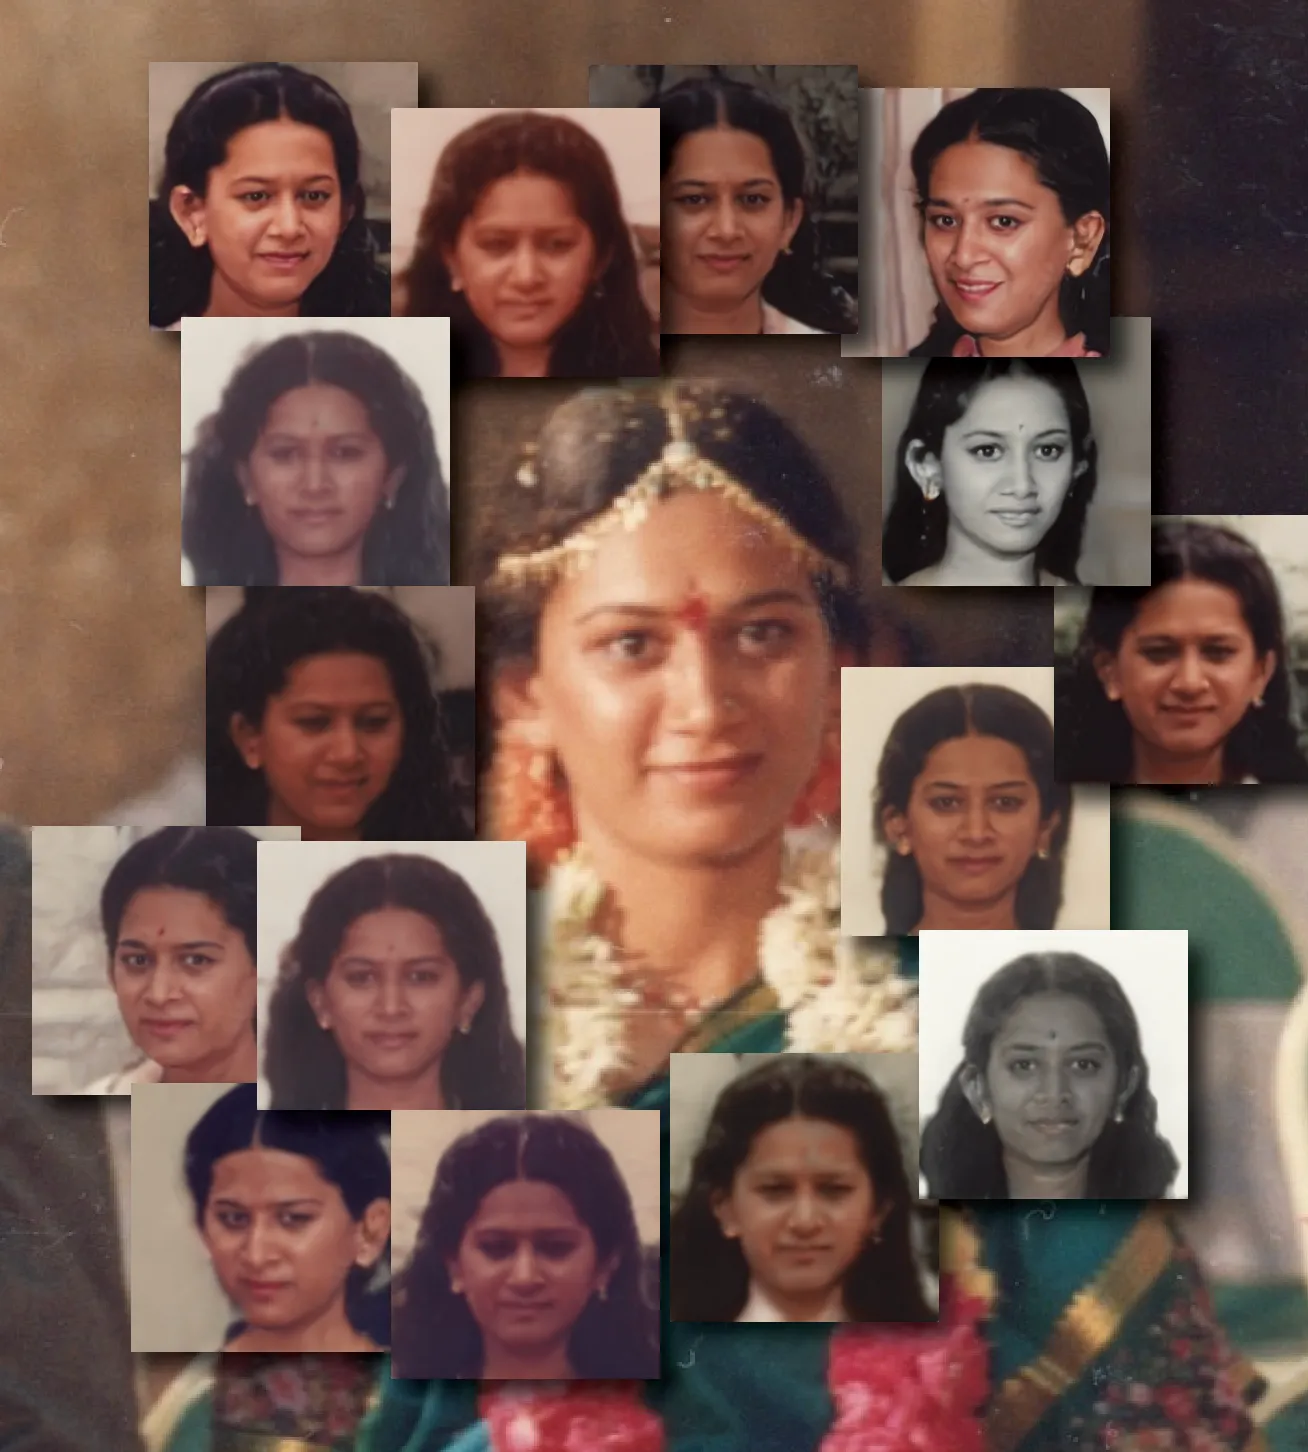 a photograph of my mother on her wedding day, surrounded by a collage of smaller generated faces that somewhat resemble her face.